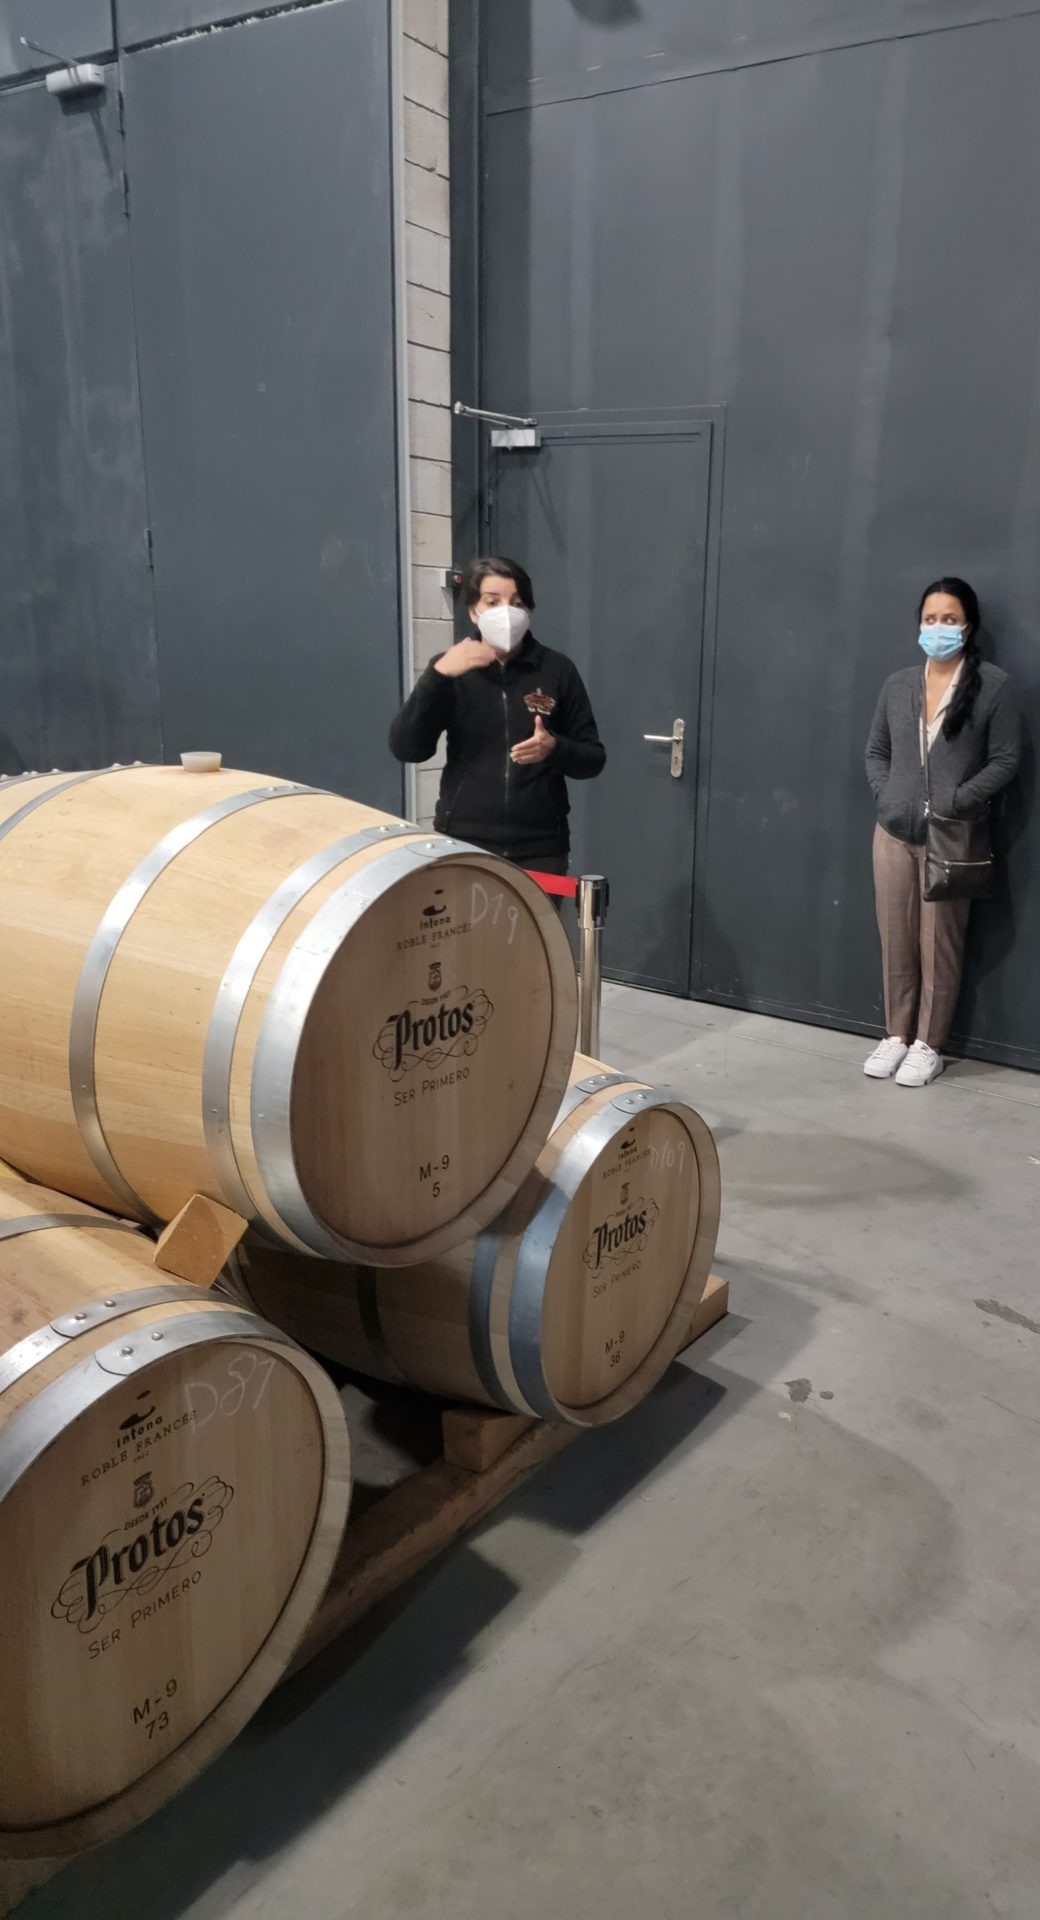 a group of people standing next to barrels